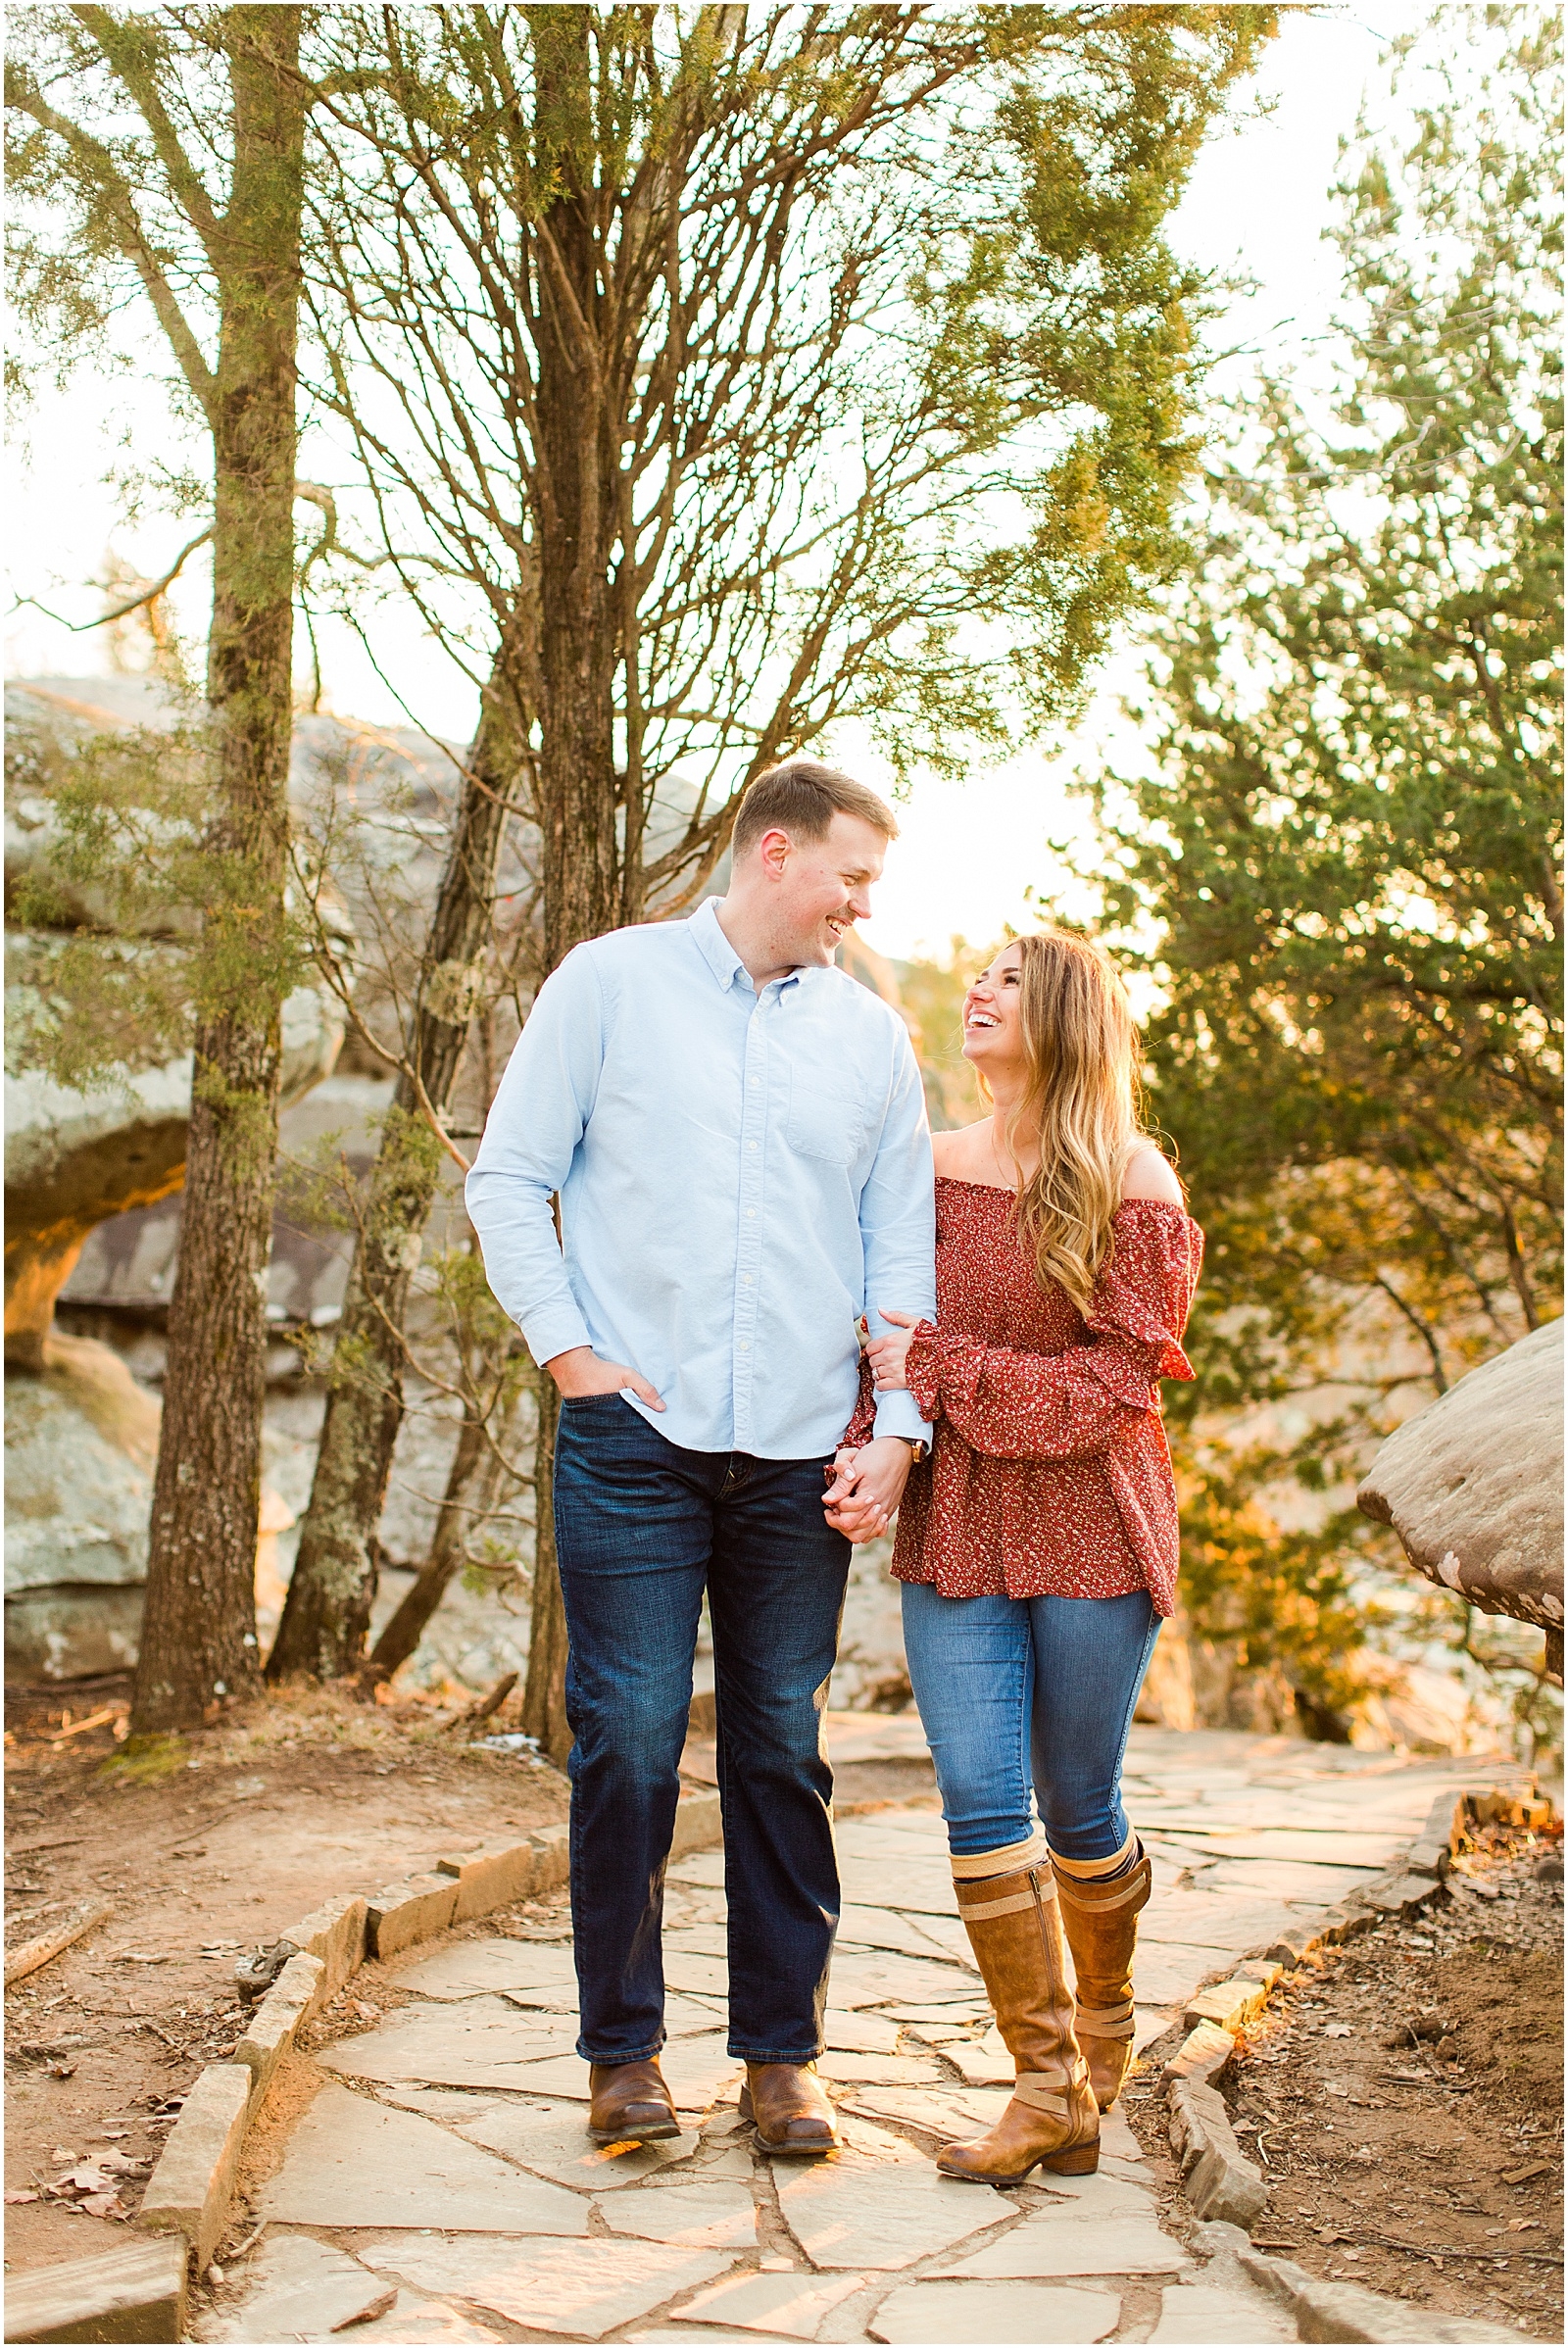 A Sunny Garden of the Gods Engagement Session | Shiloh and Lee | Bret and Brandie Photography082.jpg